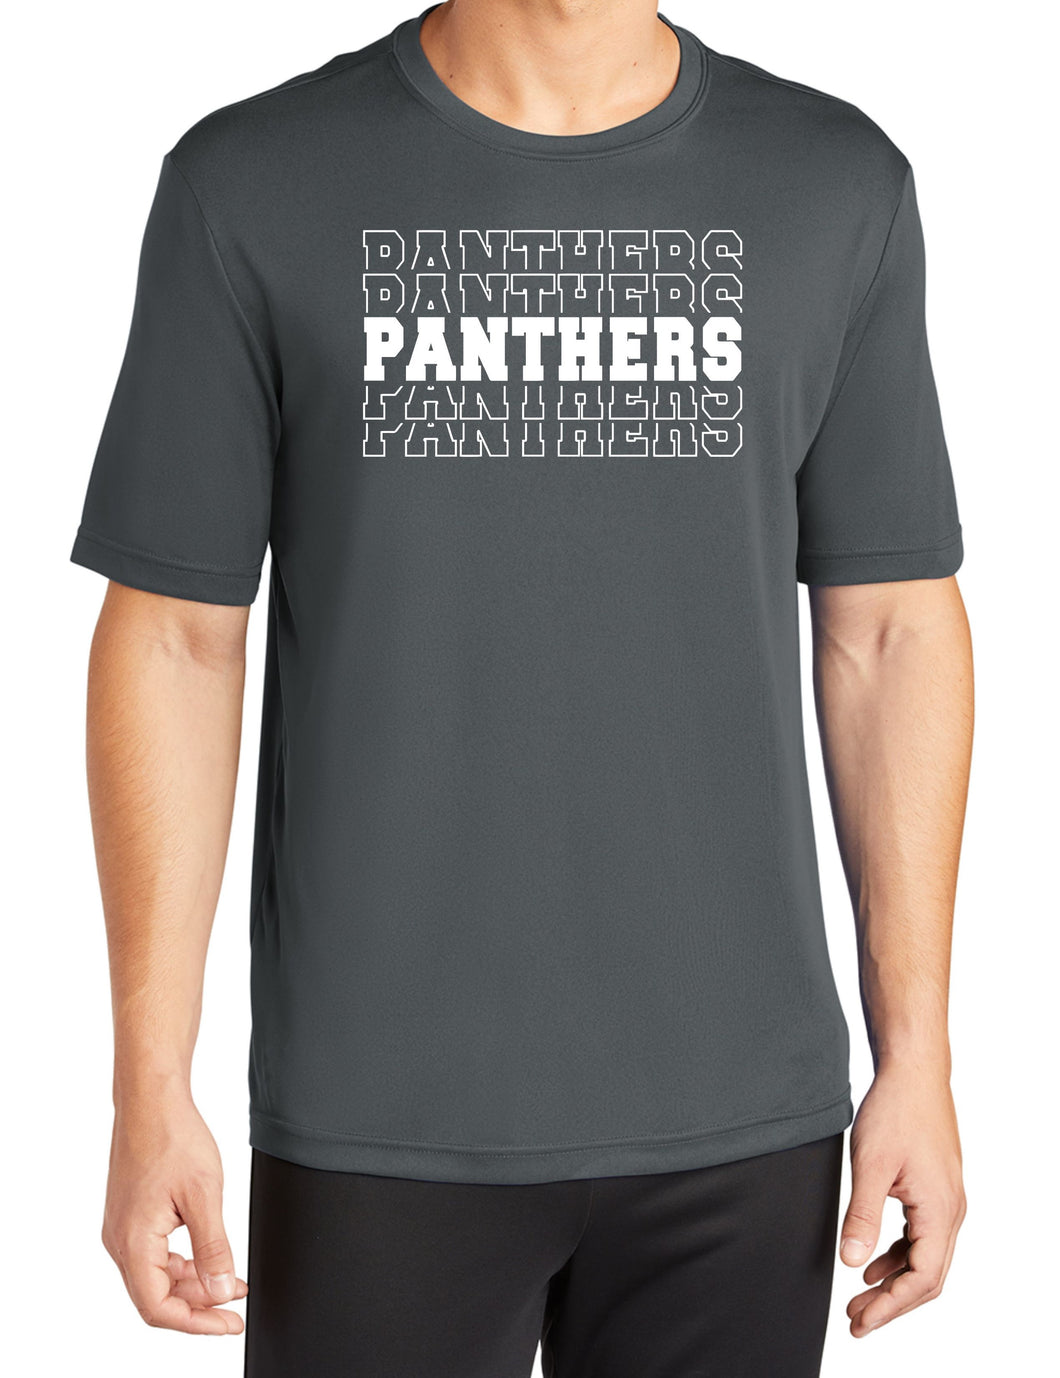 NEW *Unisex Gray PANTHERS Short Sleeved Dry Fit T-Shirt*